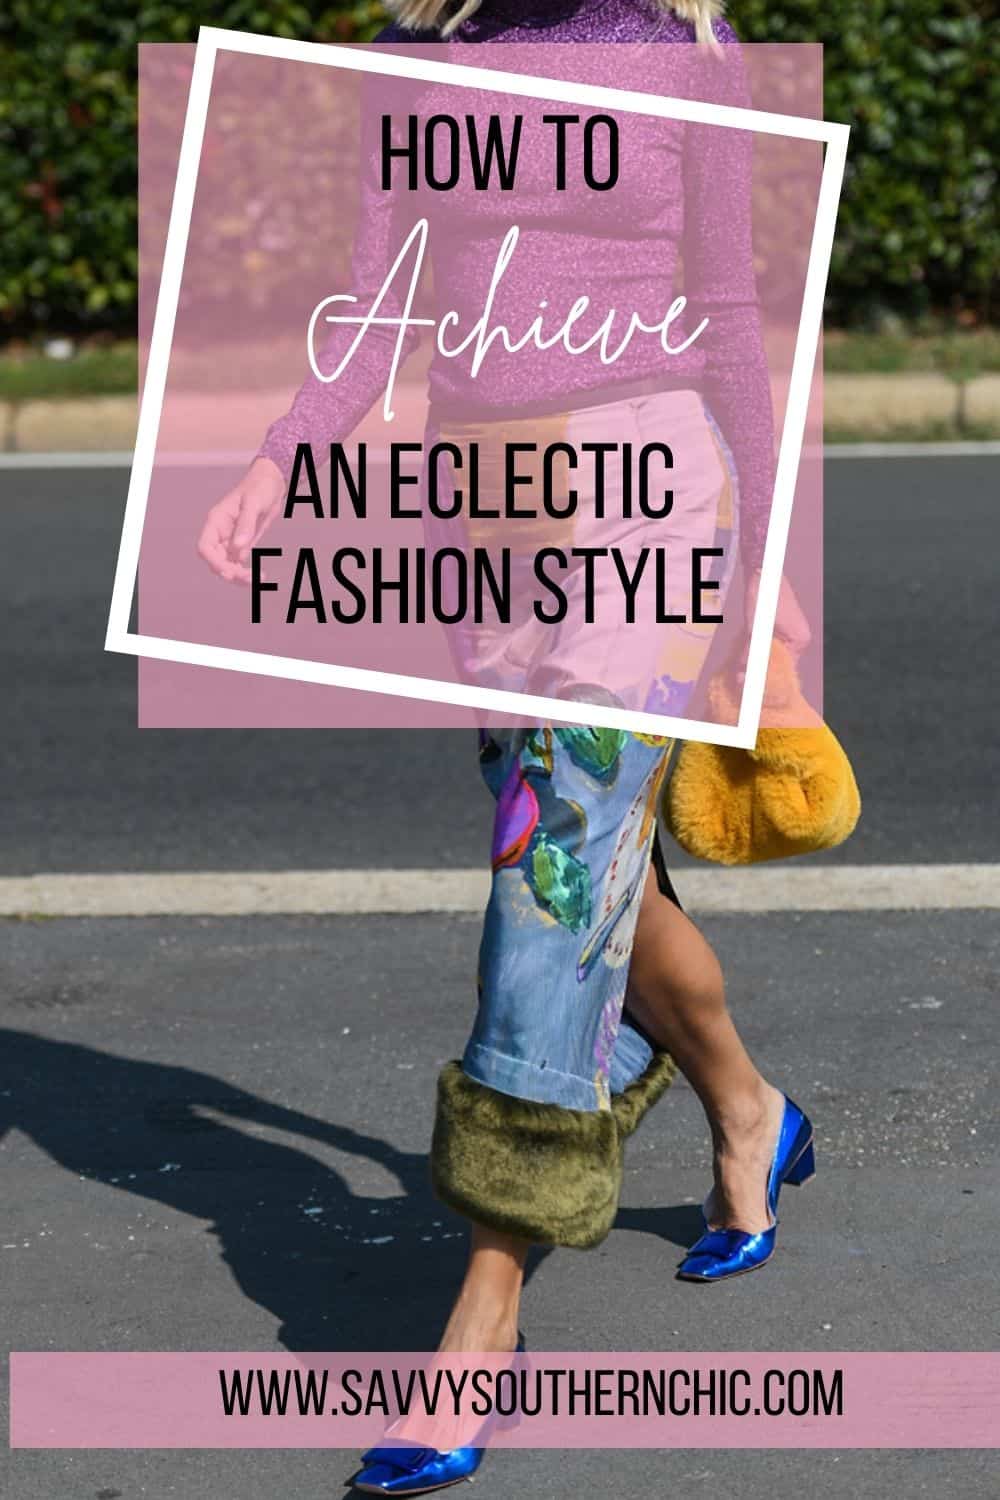 eclectic style